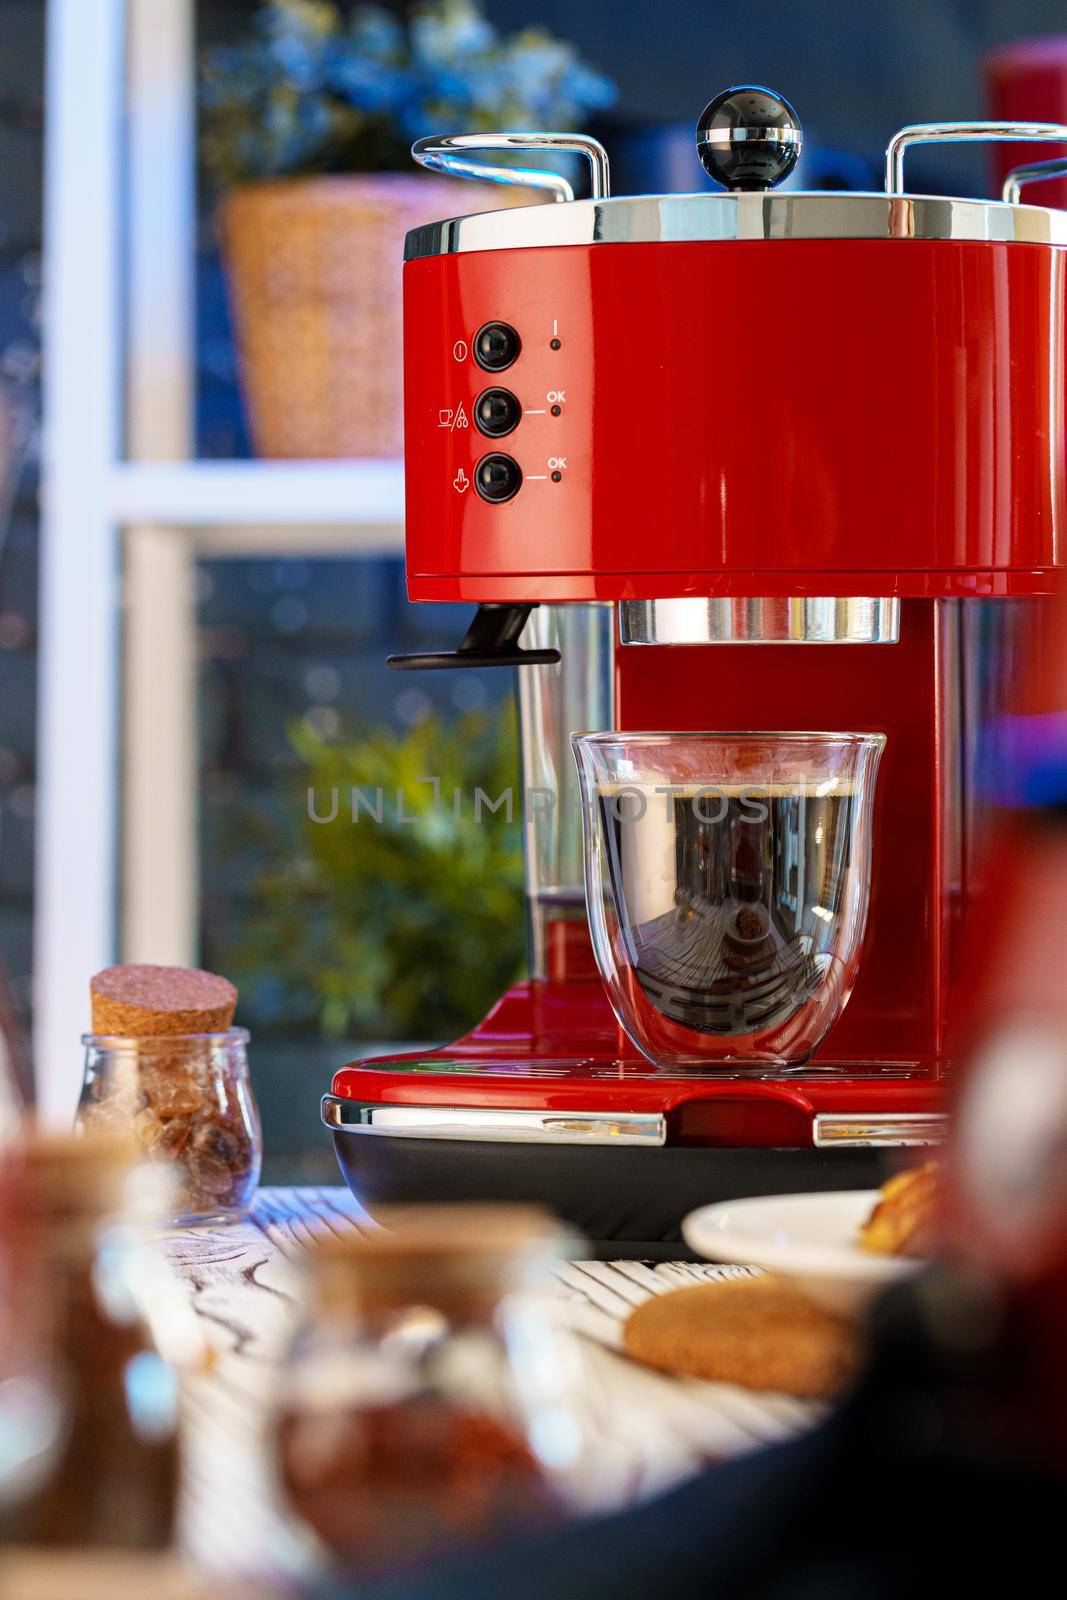 Red coffee machine with a glass on kitchen counter by Fabrikasimf